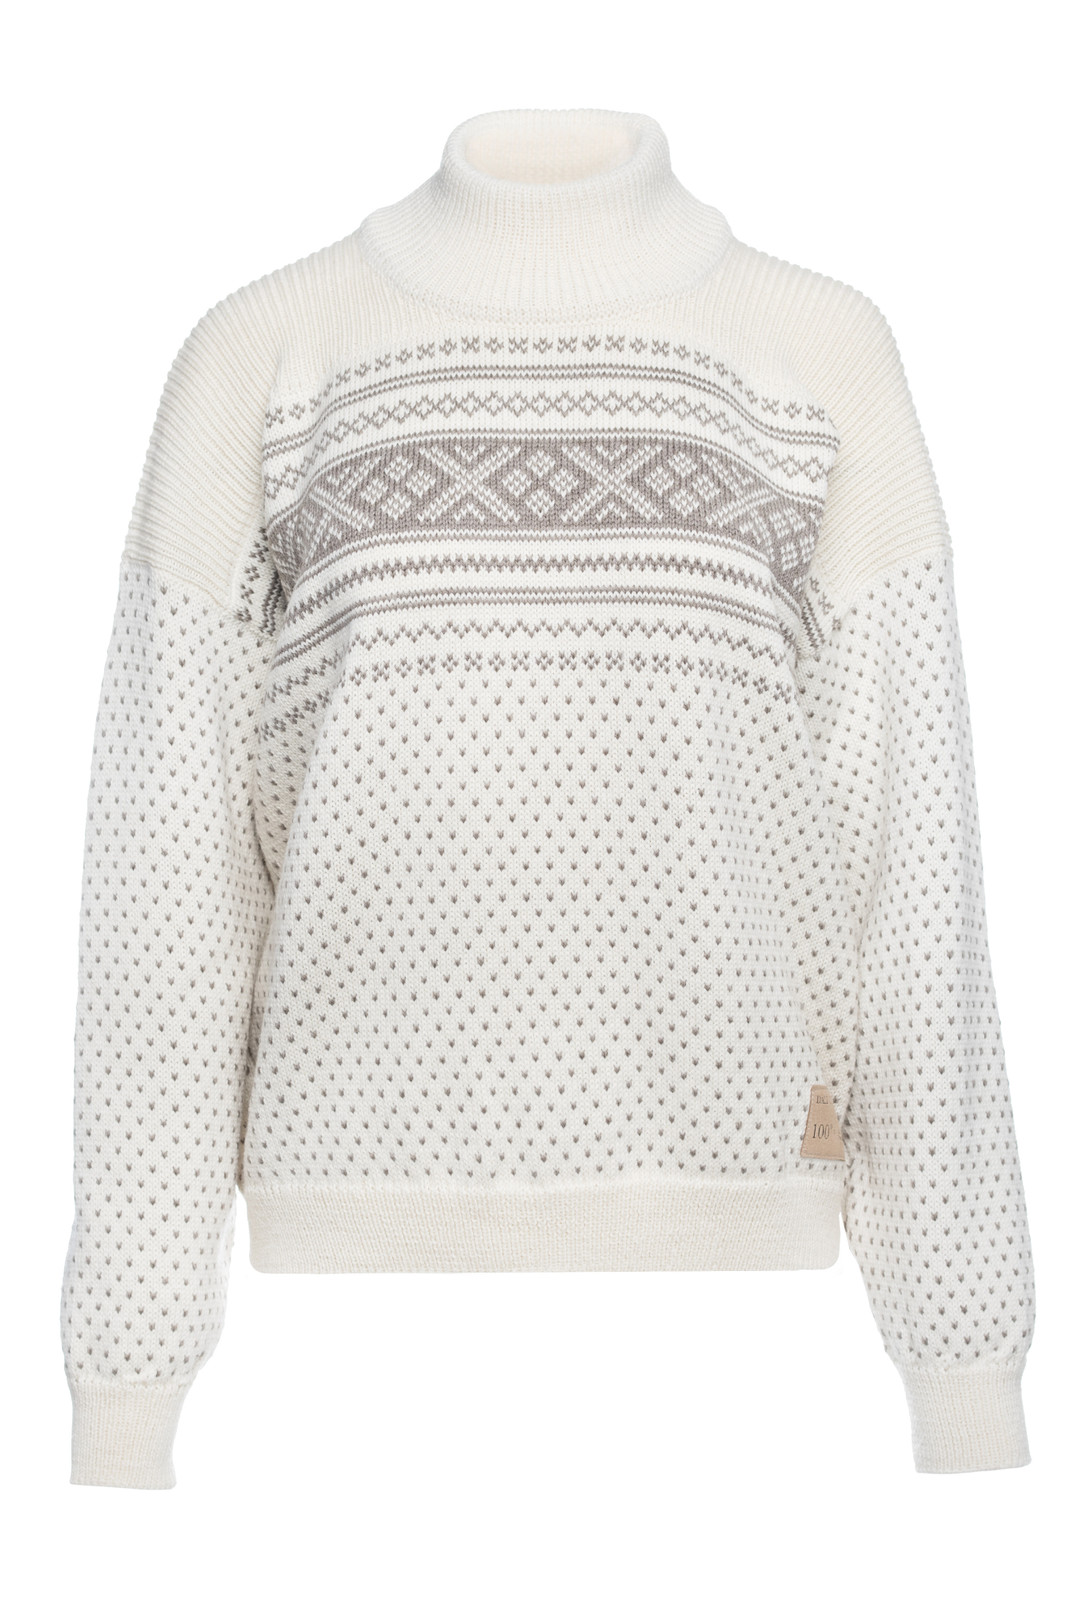 Dale of Norway Valloy Women's Sweater, Off White/Mountainstone, 95261-A01